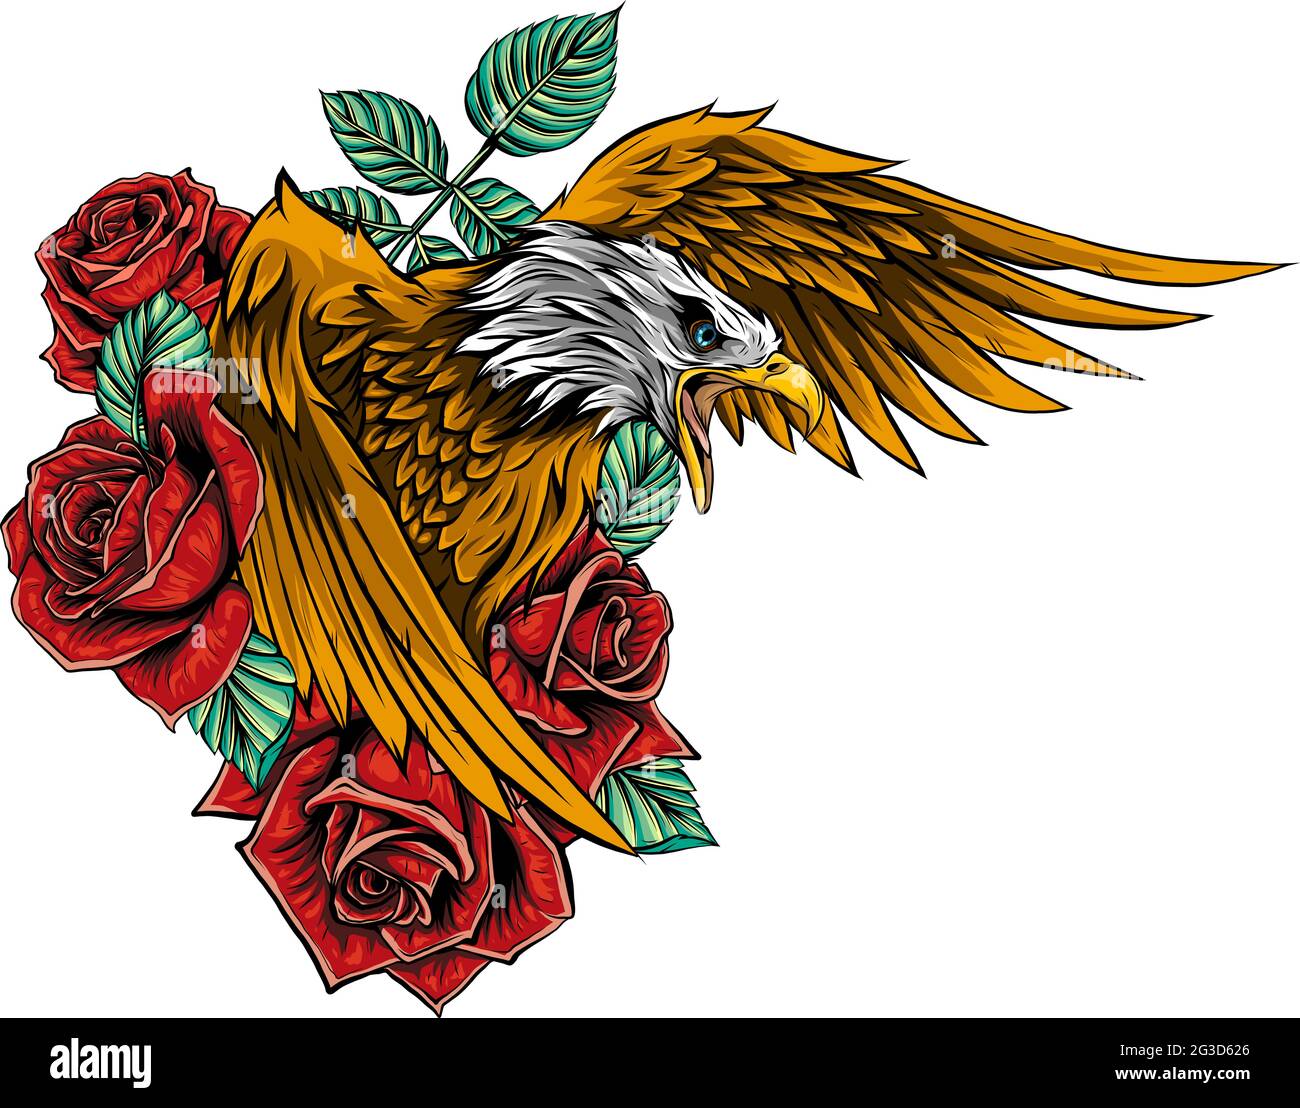 vector illustraion of eagle with flower roses Stock Vector